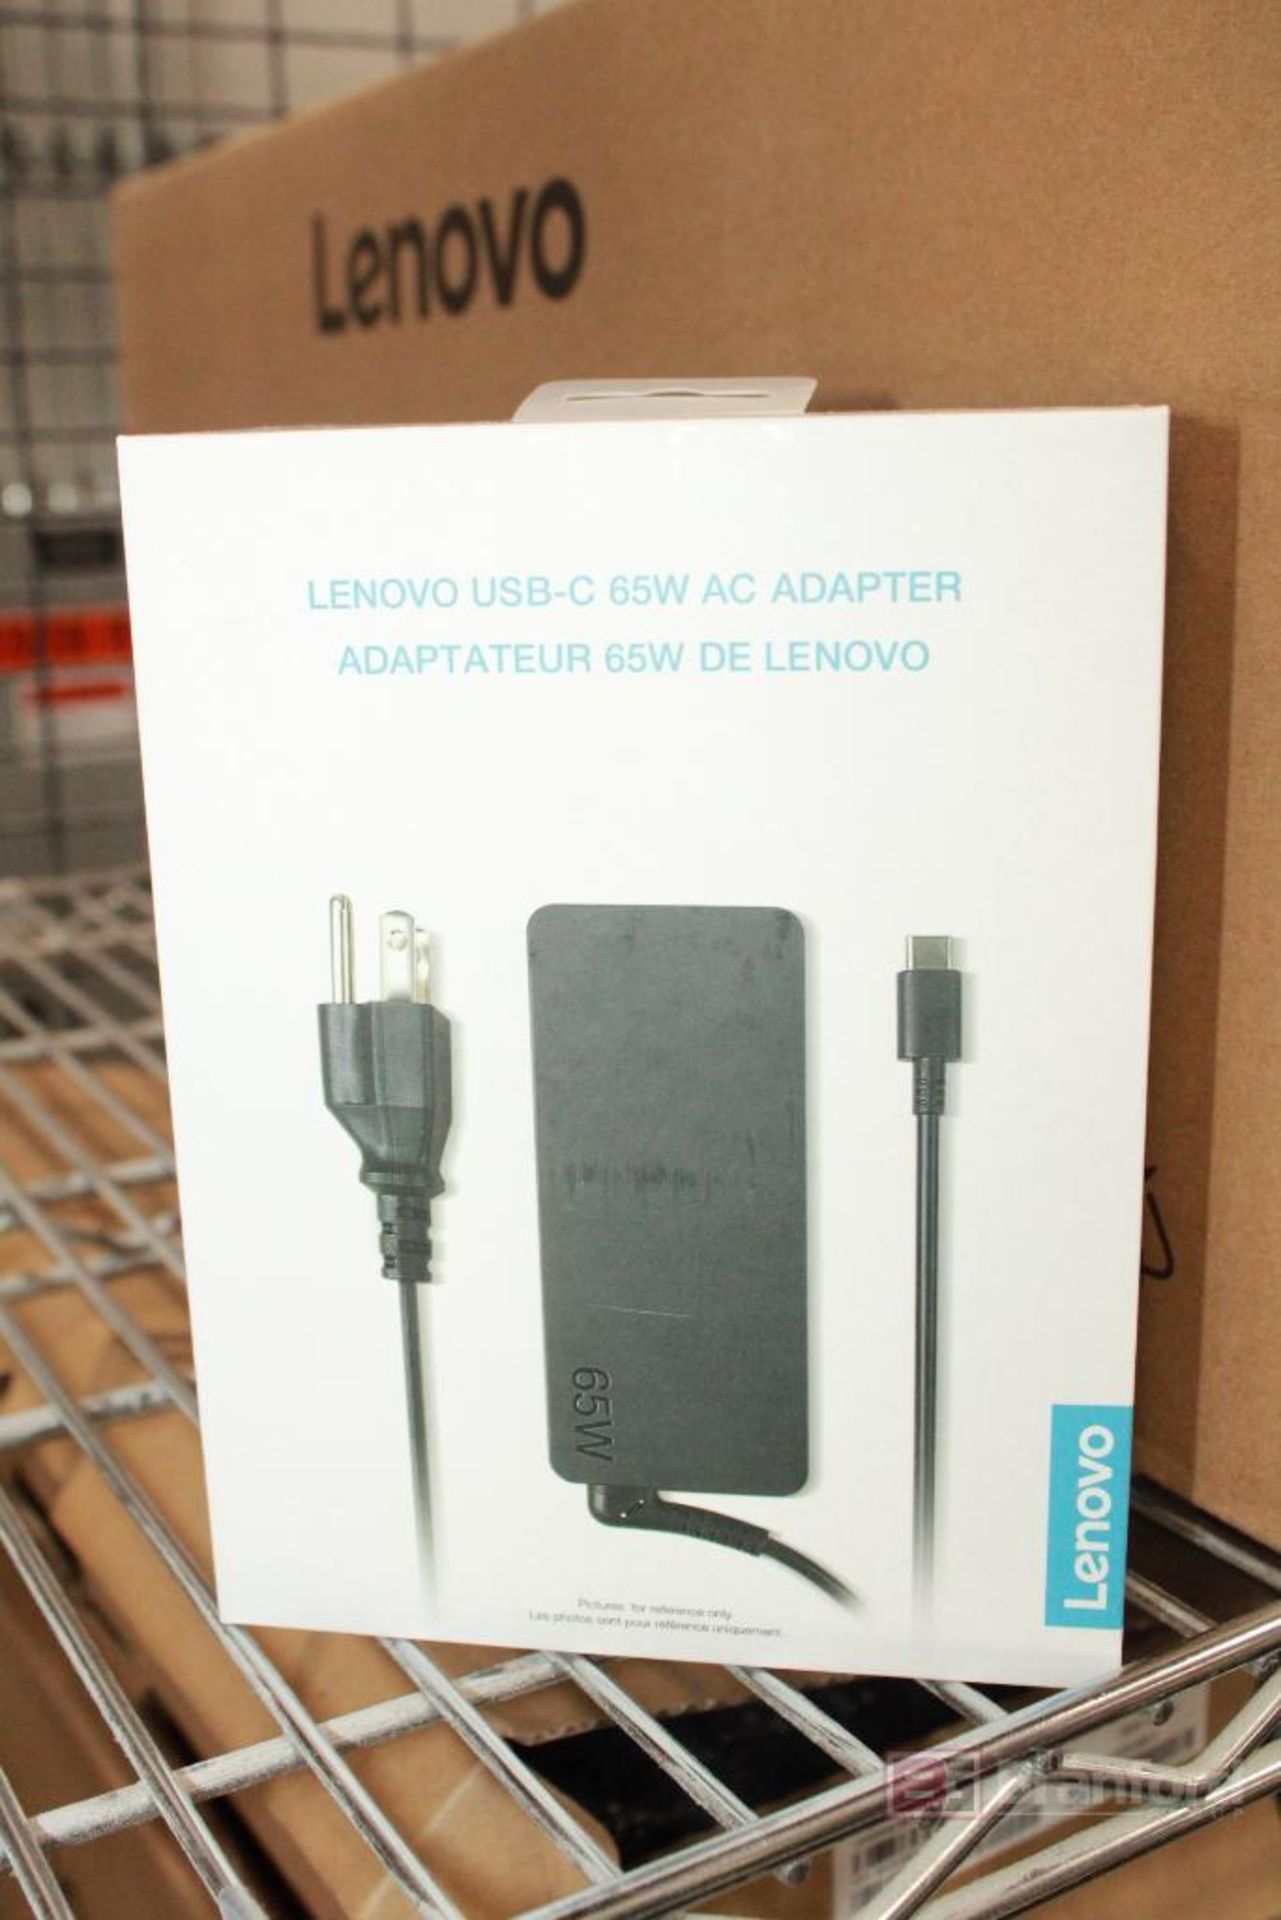 (36) Lenovo USB-C Adapters, New In Box - Image 2 of 2